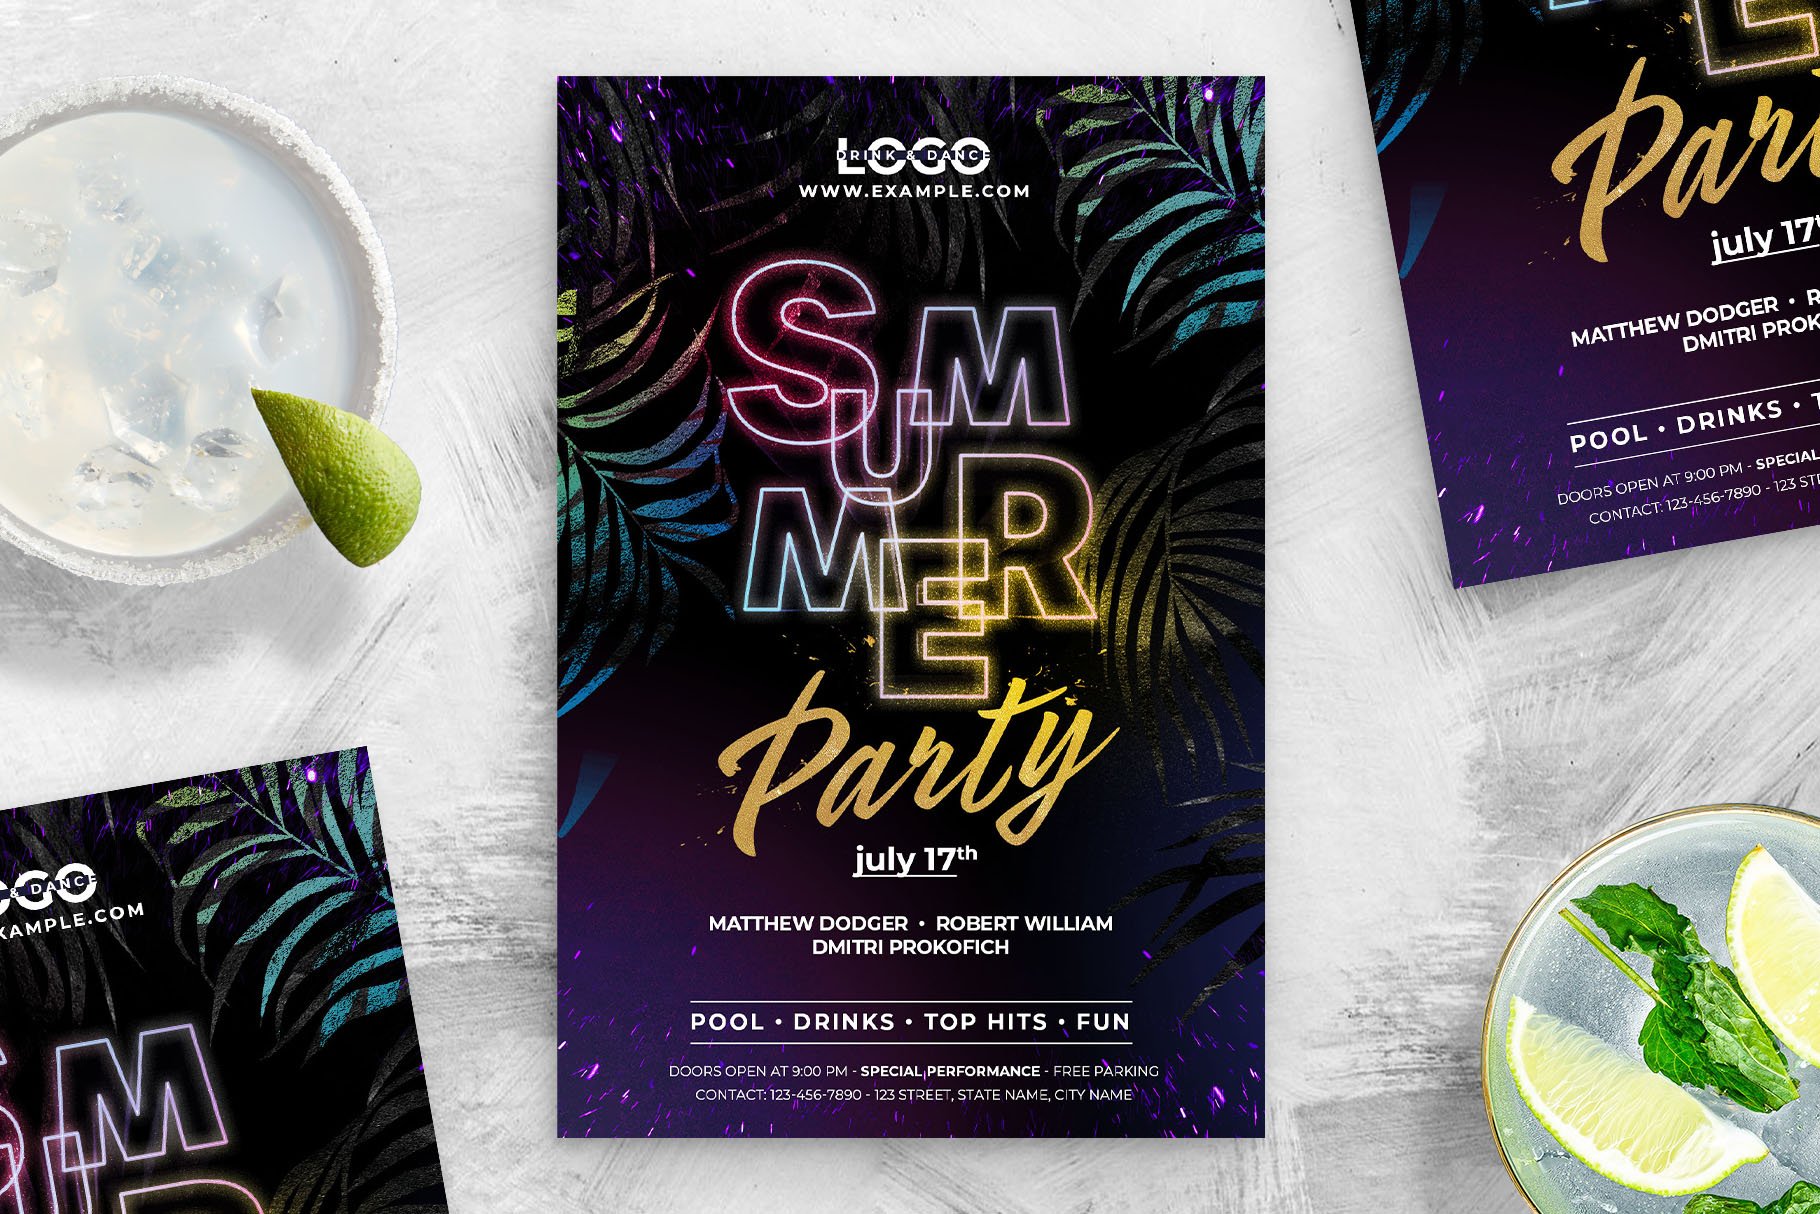 Summer Party Flyer Template cover image.